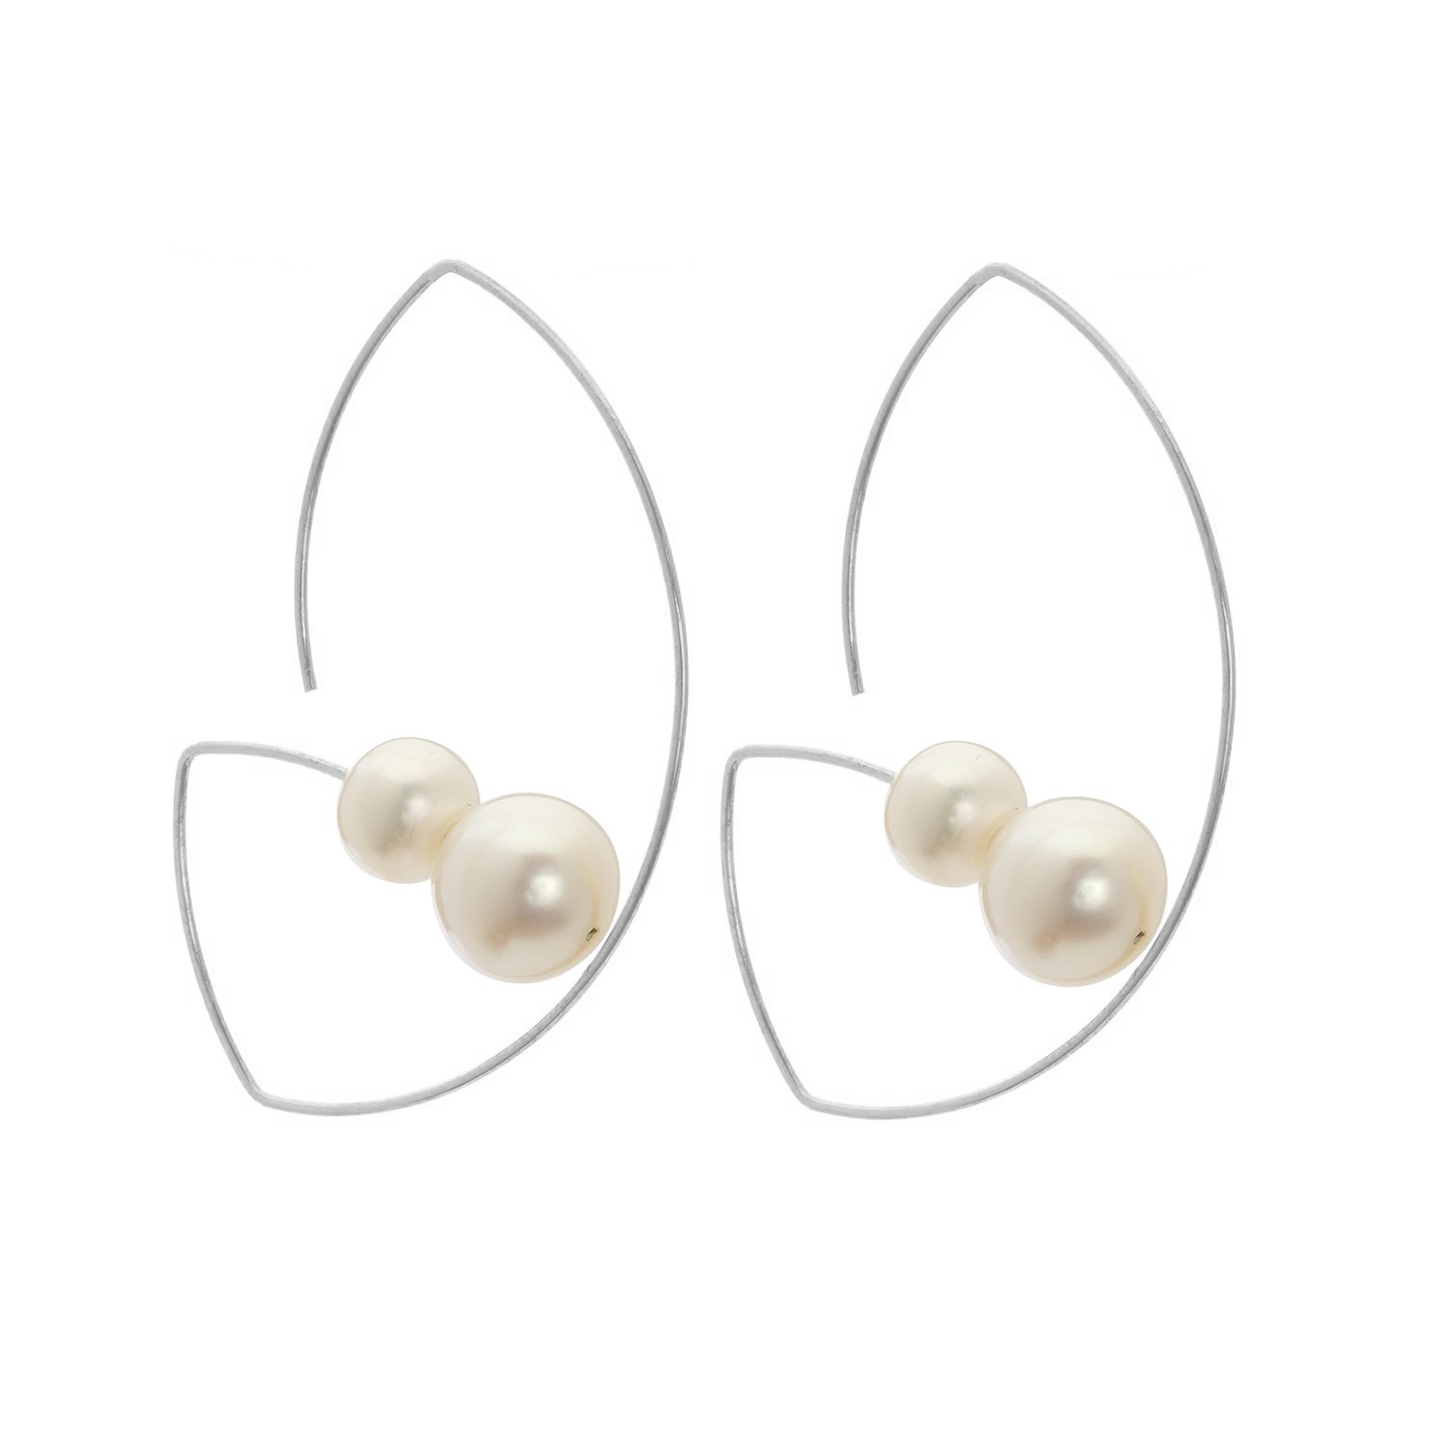 Long Angled Curve Earrings with Round Freshwater Pearls